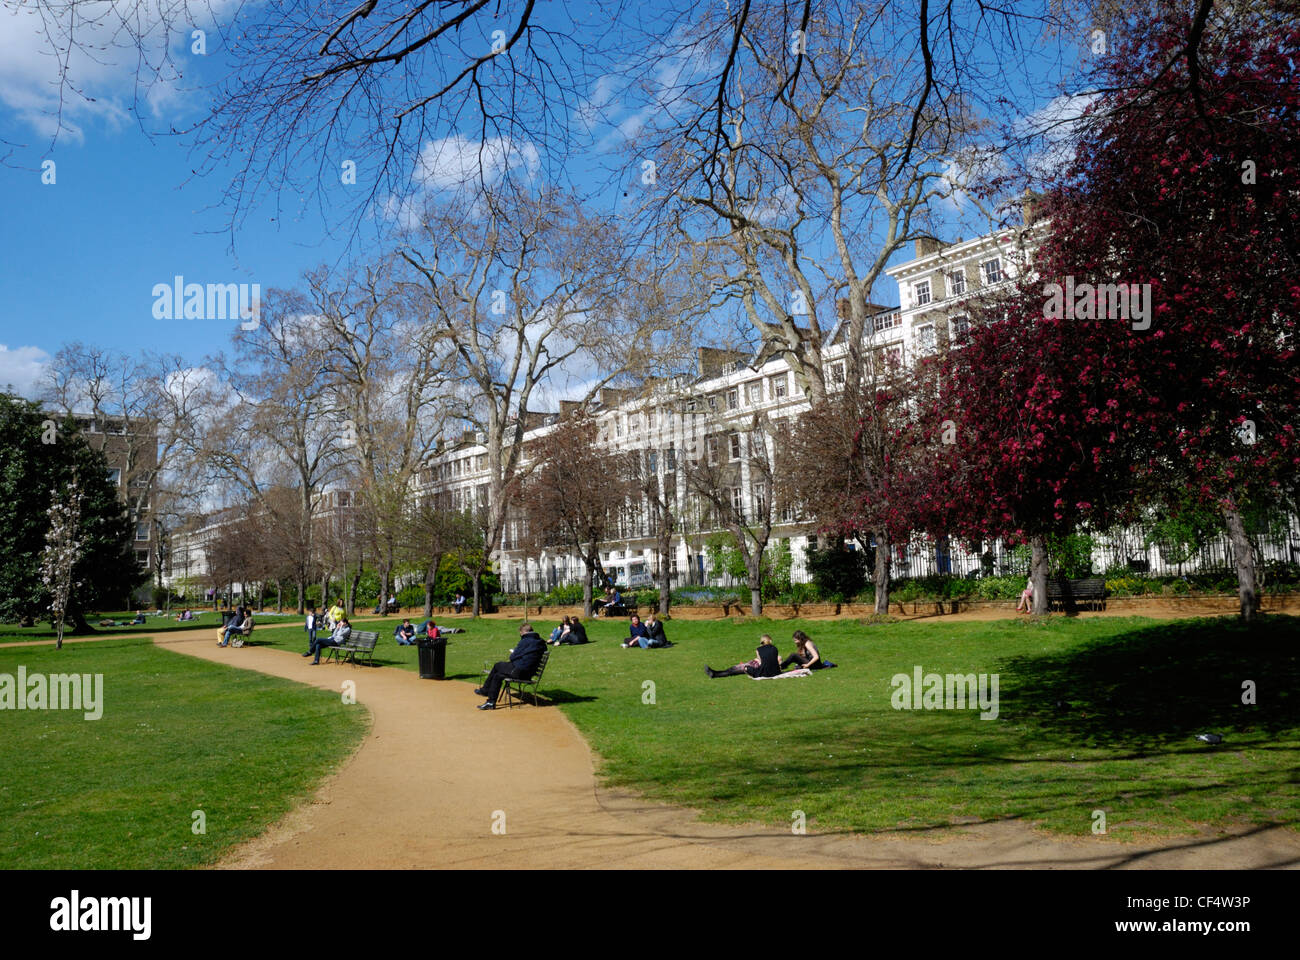 Gordon Square Garden, developed by Thomas Cubitt in the 1820's and now owned by the University of London. Stock Photo